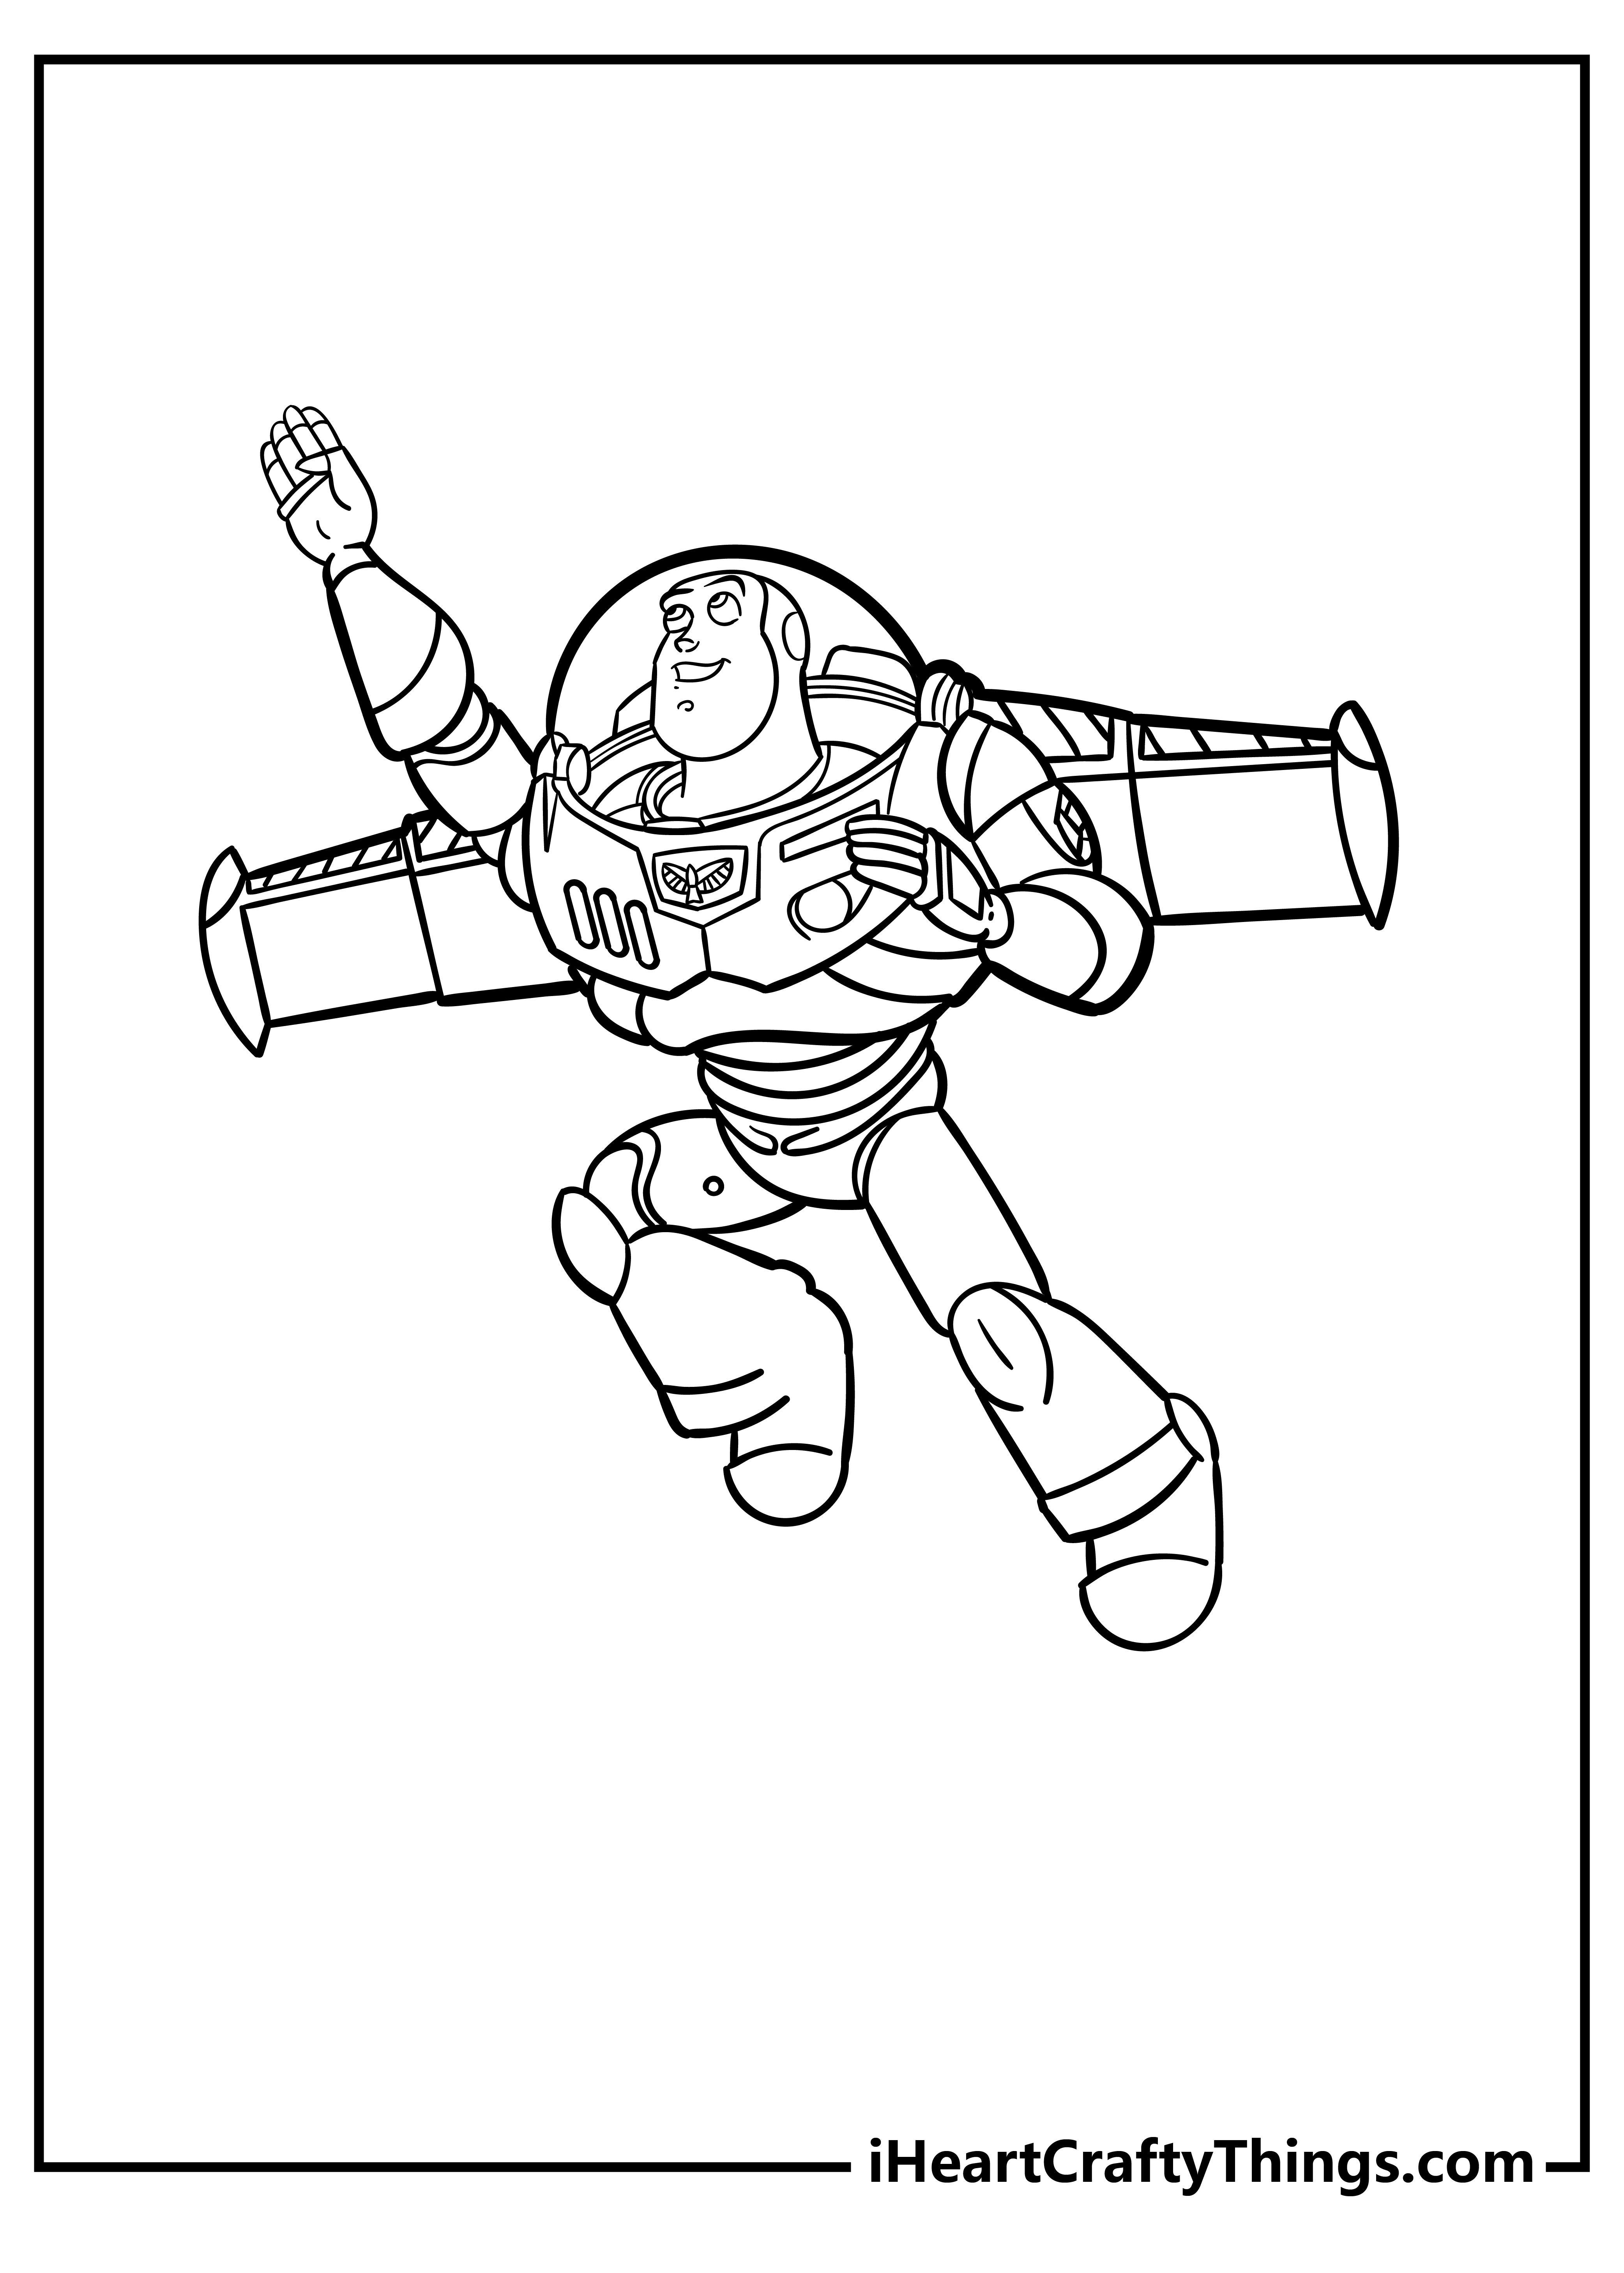 Buzz Lightyear Cartoon Coloring Pages for kids free download